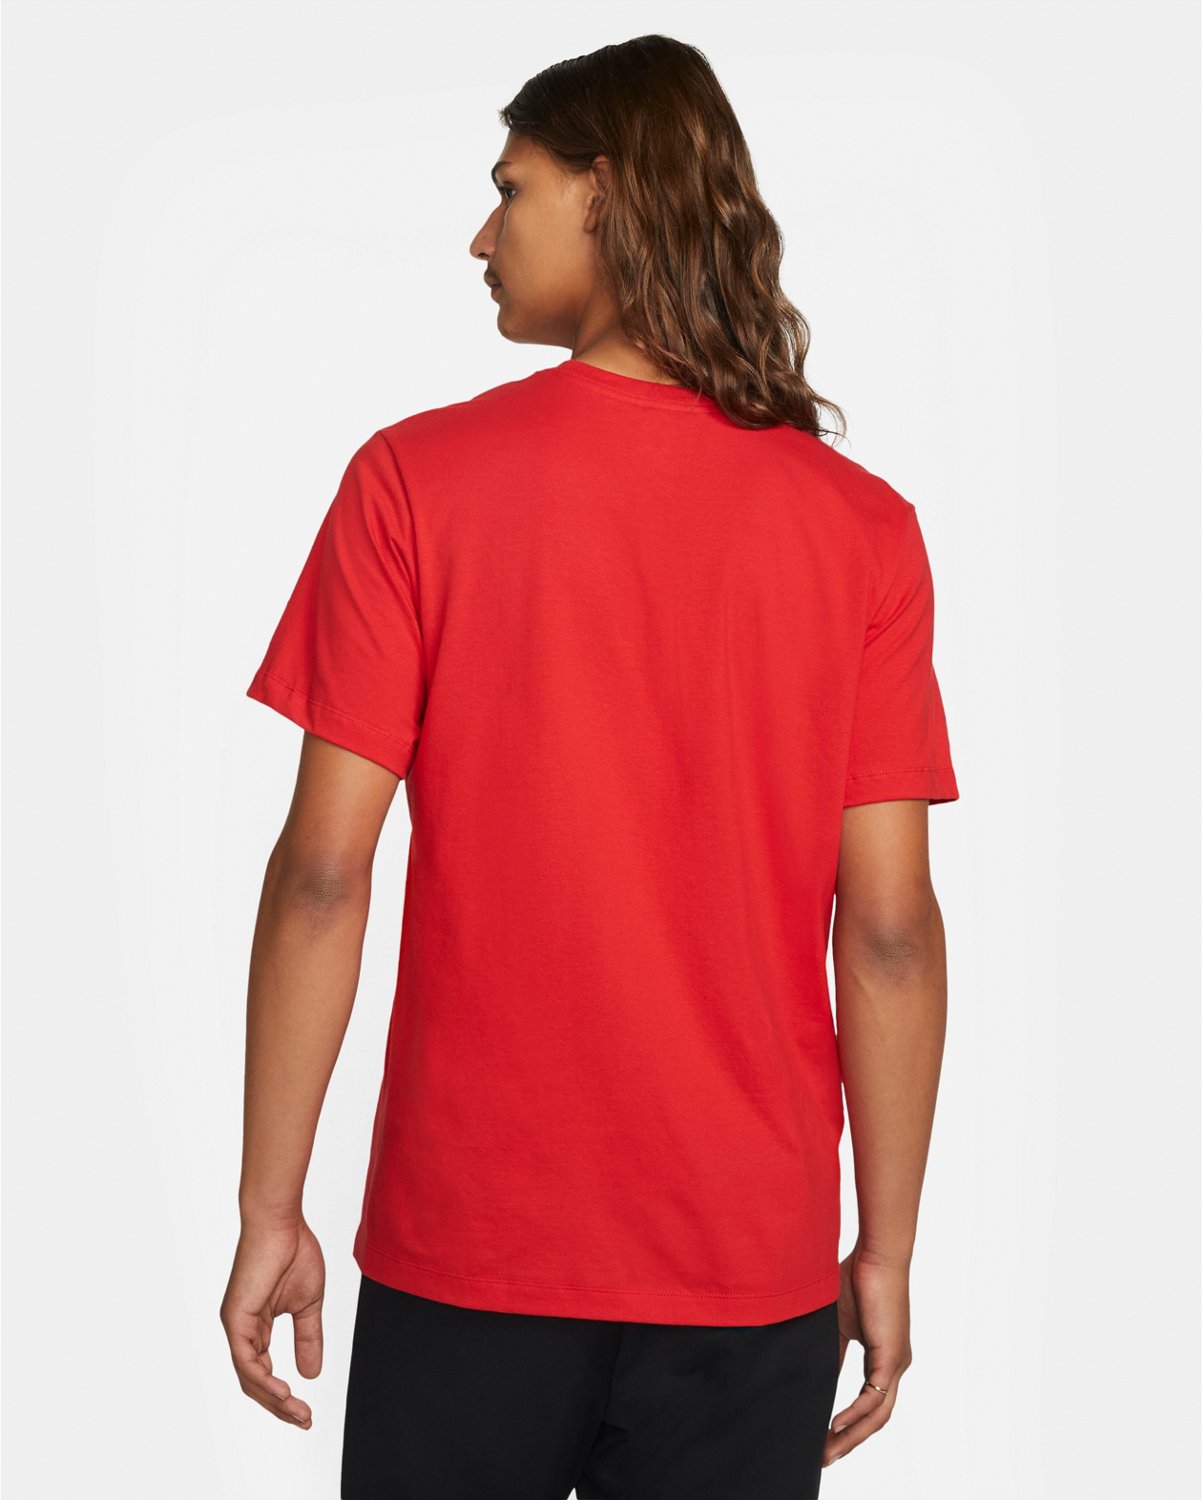 | Just Nike It Shipping at Do Men\'s Free Academy T-shirt